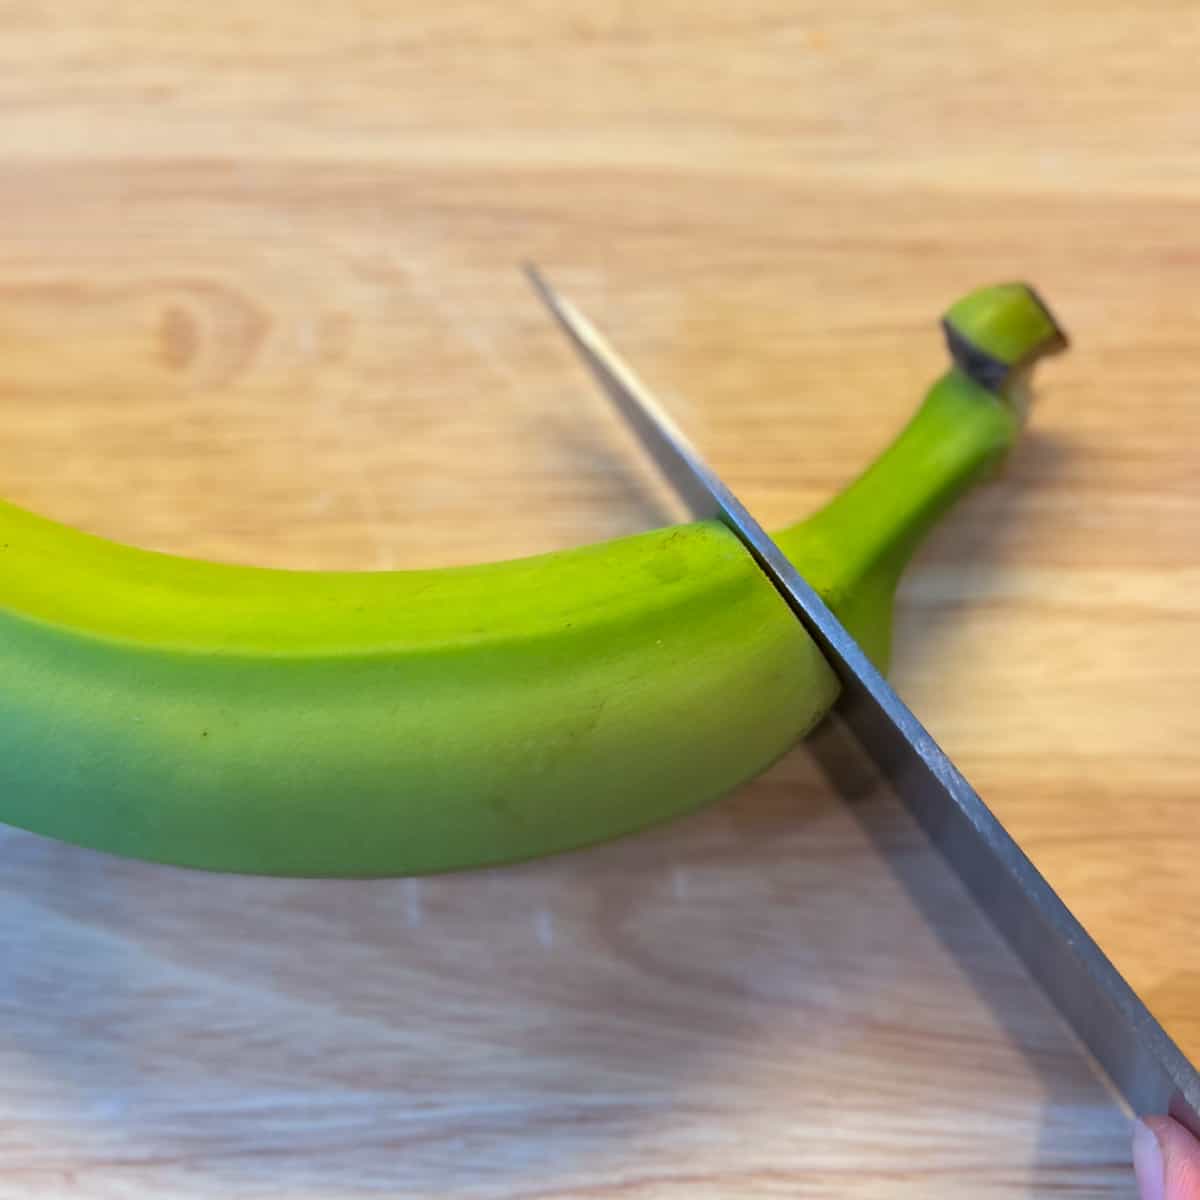 top view of a knife cutting the stem off of a green banana on a cutting board